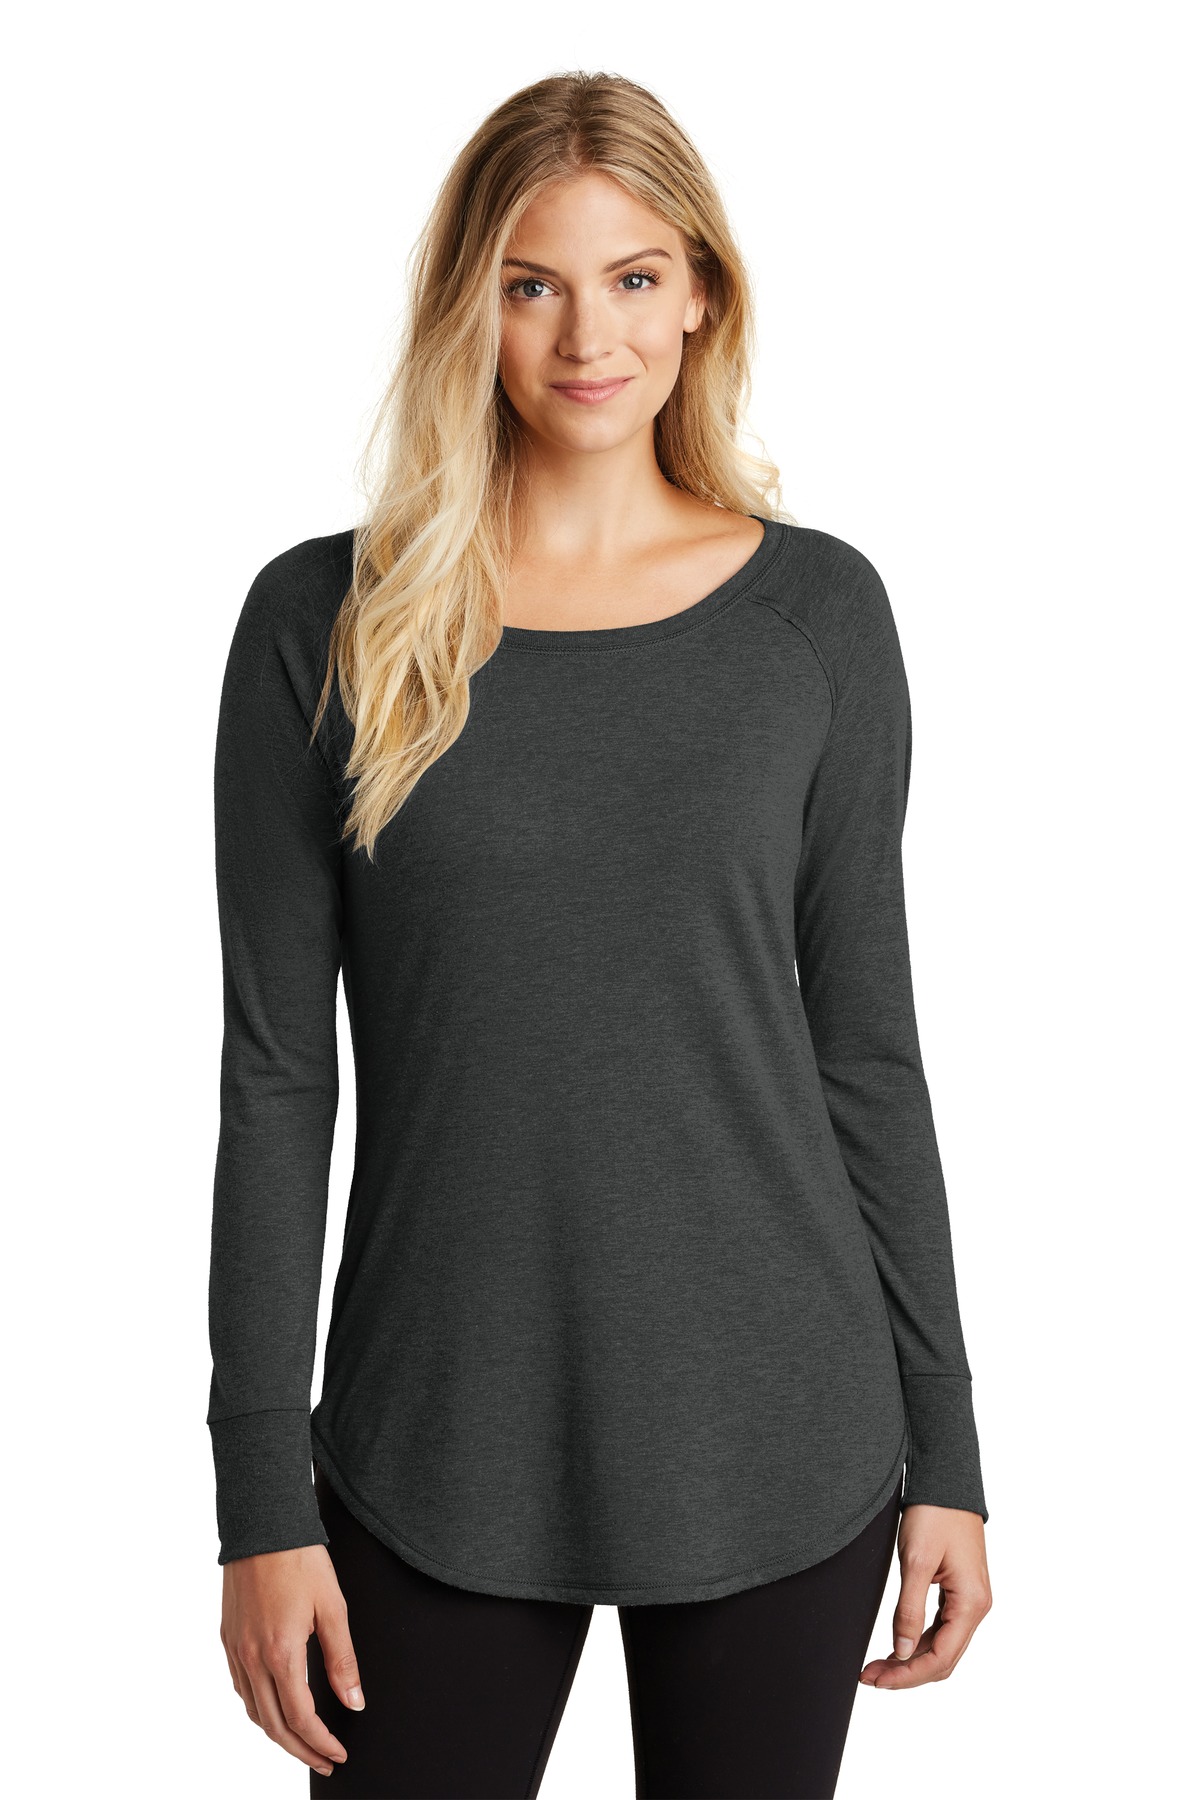 District DT132L, Women's Perfect Tri ® Long Sleeve Tunic Tee